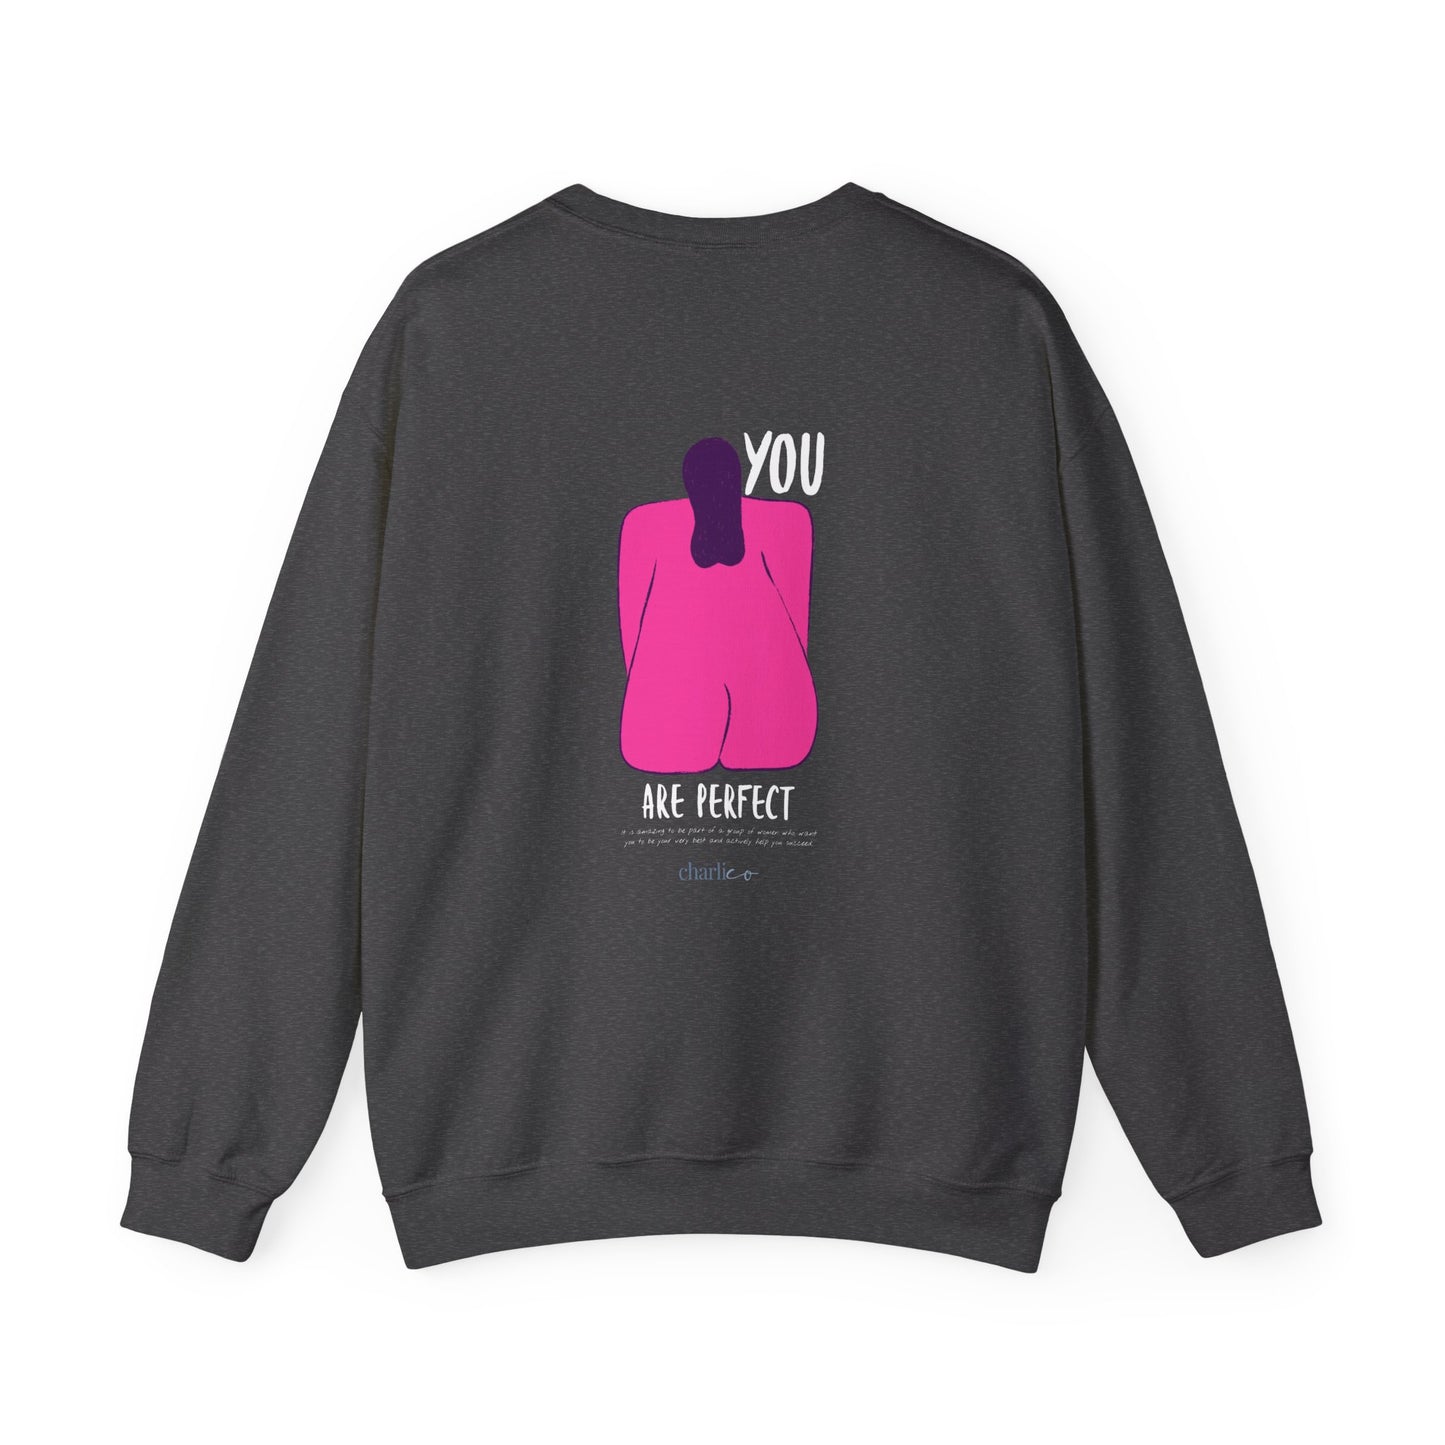 Crewneck sweatshirt -you are perfect- for adults